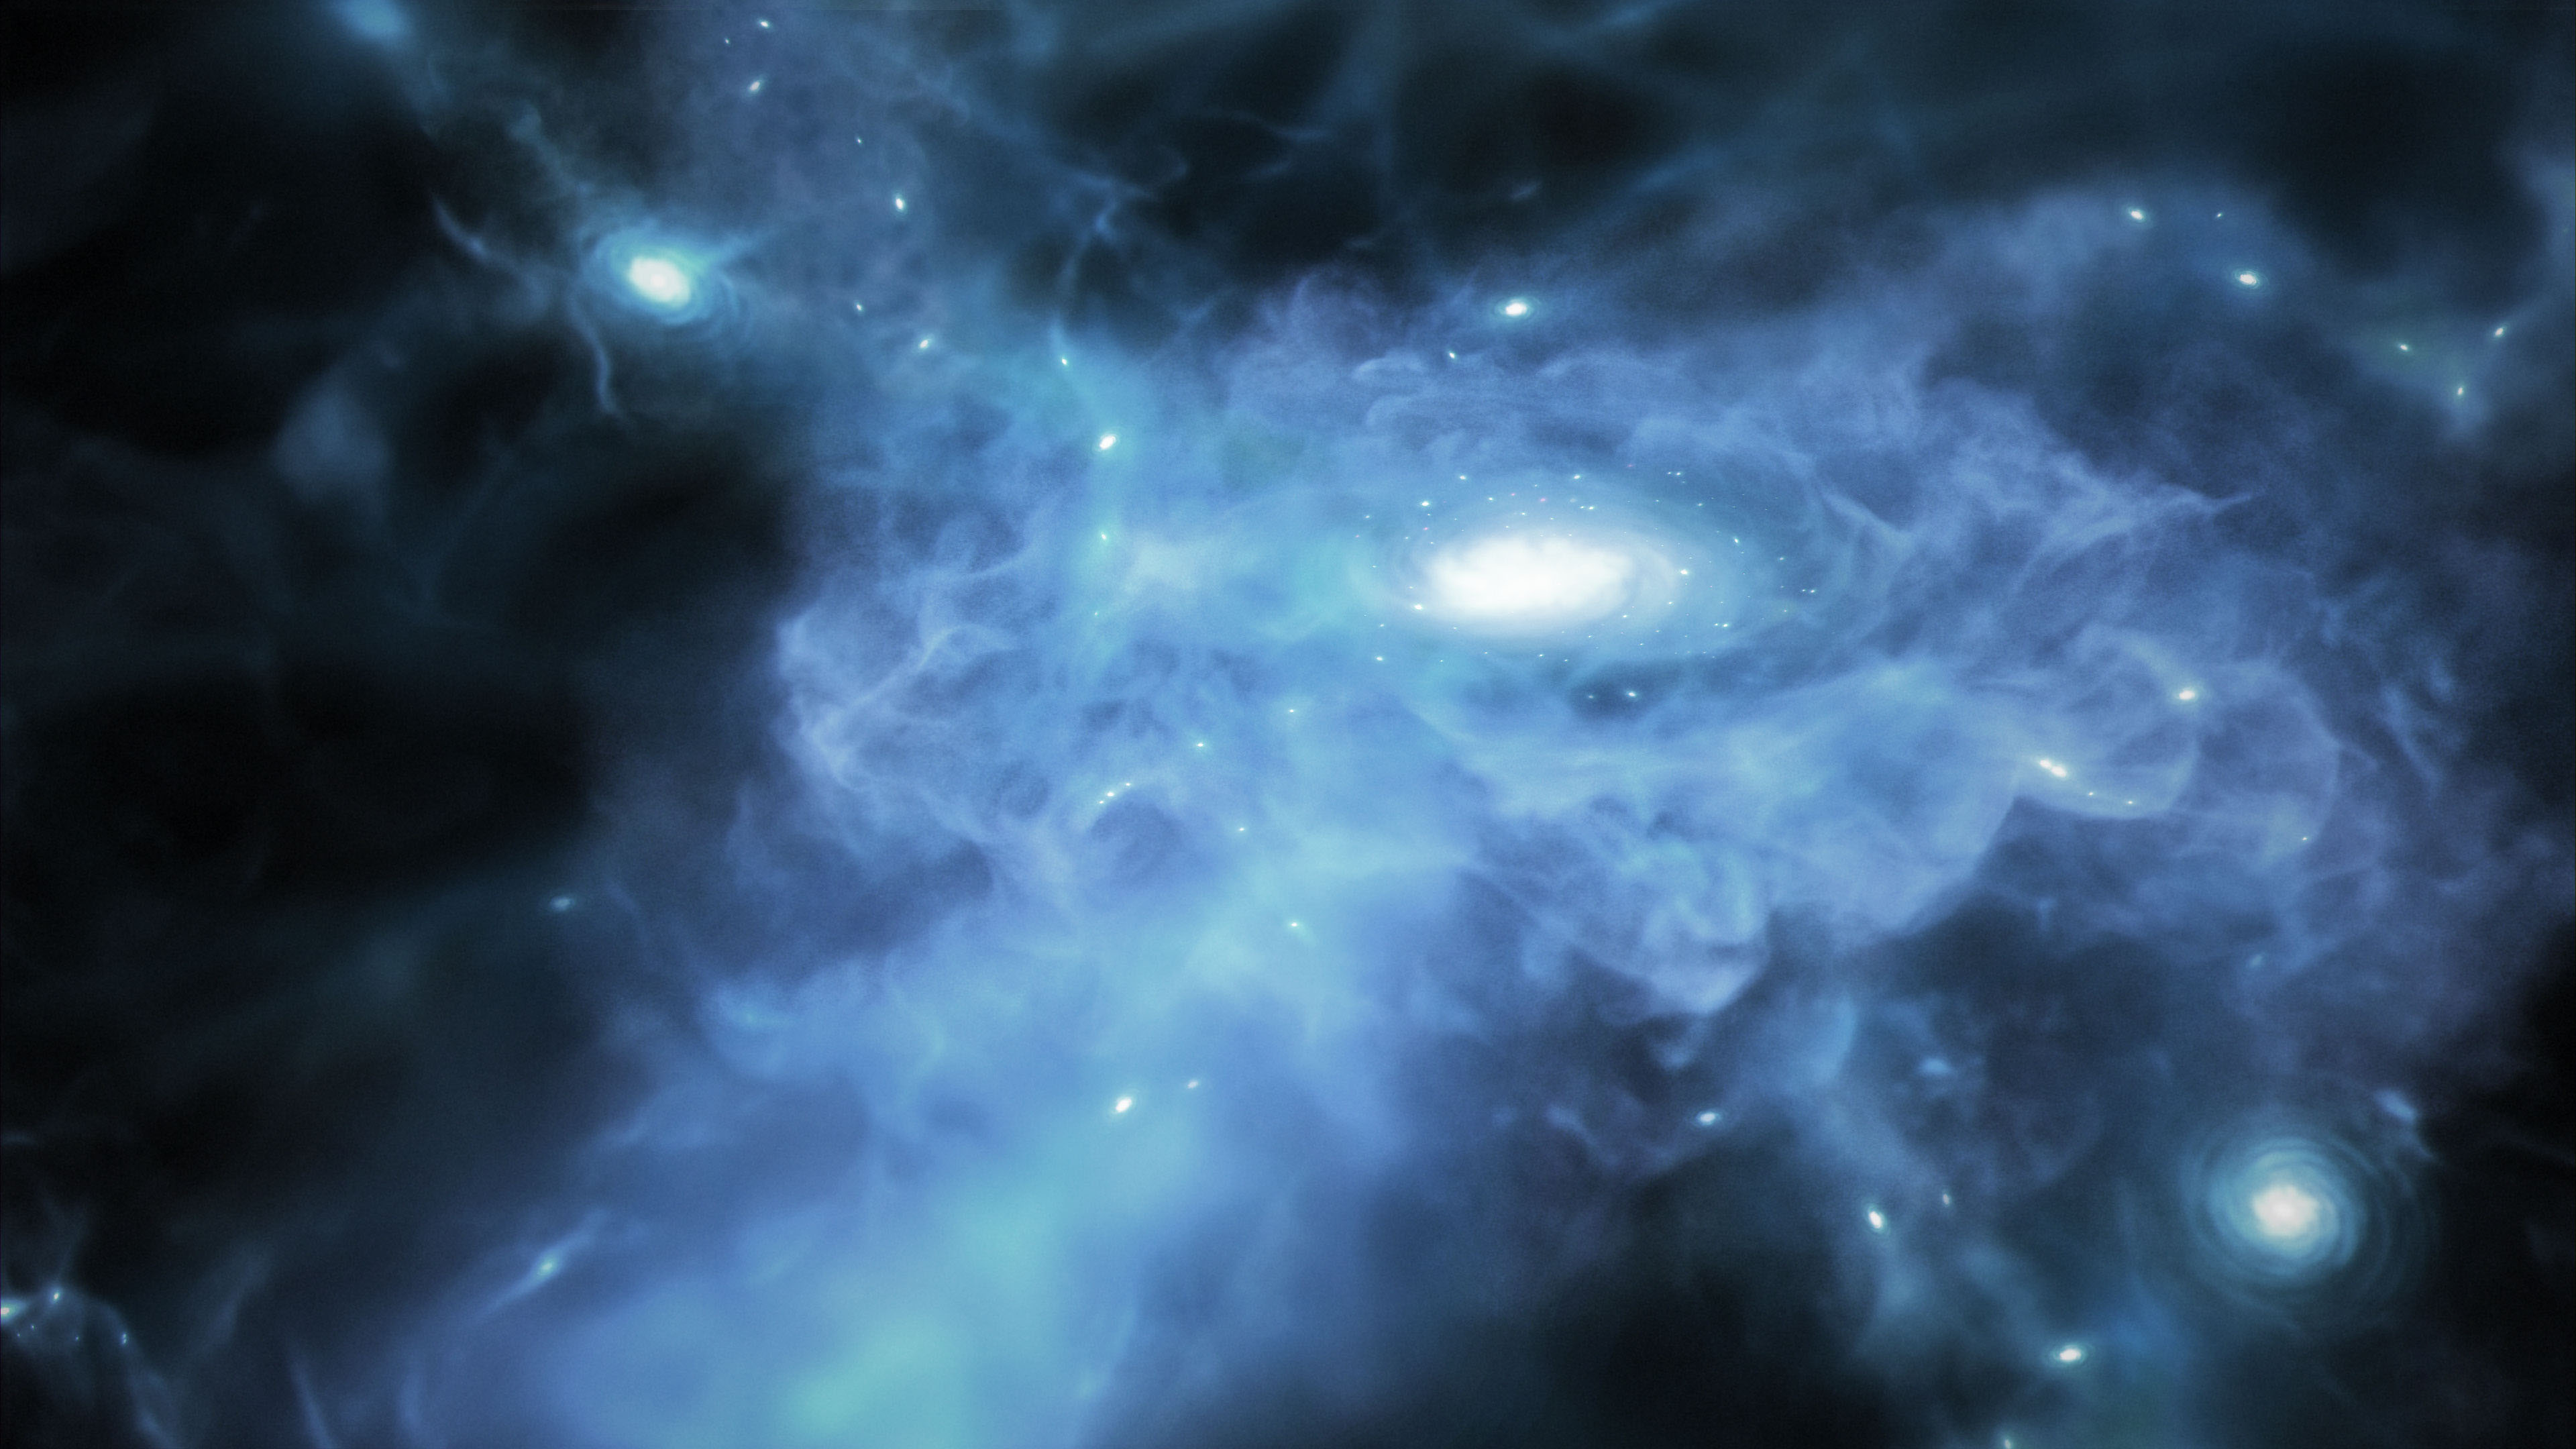 This illustration is awash in bright blues, with only areas of the black background of space peeking out near the edges. Just above center is a large white spiral galaxy that is forming within a large cloud of blue gas. Its spiral arms twirl clockwise. Immediately around the galaxy’s edges are larger light blue dots. The gas appears thicker and brighter blue below the galaxy and toward the bottom left in what looks like a loose, extended column. Other wispy blue gas appears all around the galaxy, extending to every edge of the illustration. There are two additional spiral galaxies, though they are about half the size of the one at the center. They appear toward the top left and bottom right, and both are connected to regions of blue gas. Several bright knots dot the brightest blue areas near the center, and toward the top right. The background is clearer and more obviously black along a wider area at the left edge, a sliver along the top right, and in triangles toward the bottom right corner.